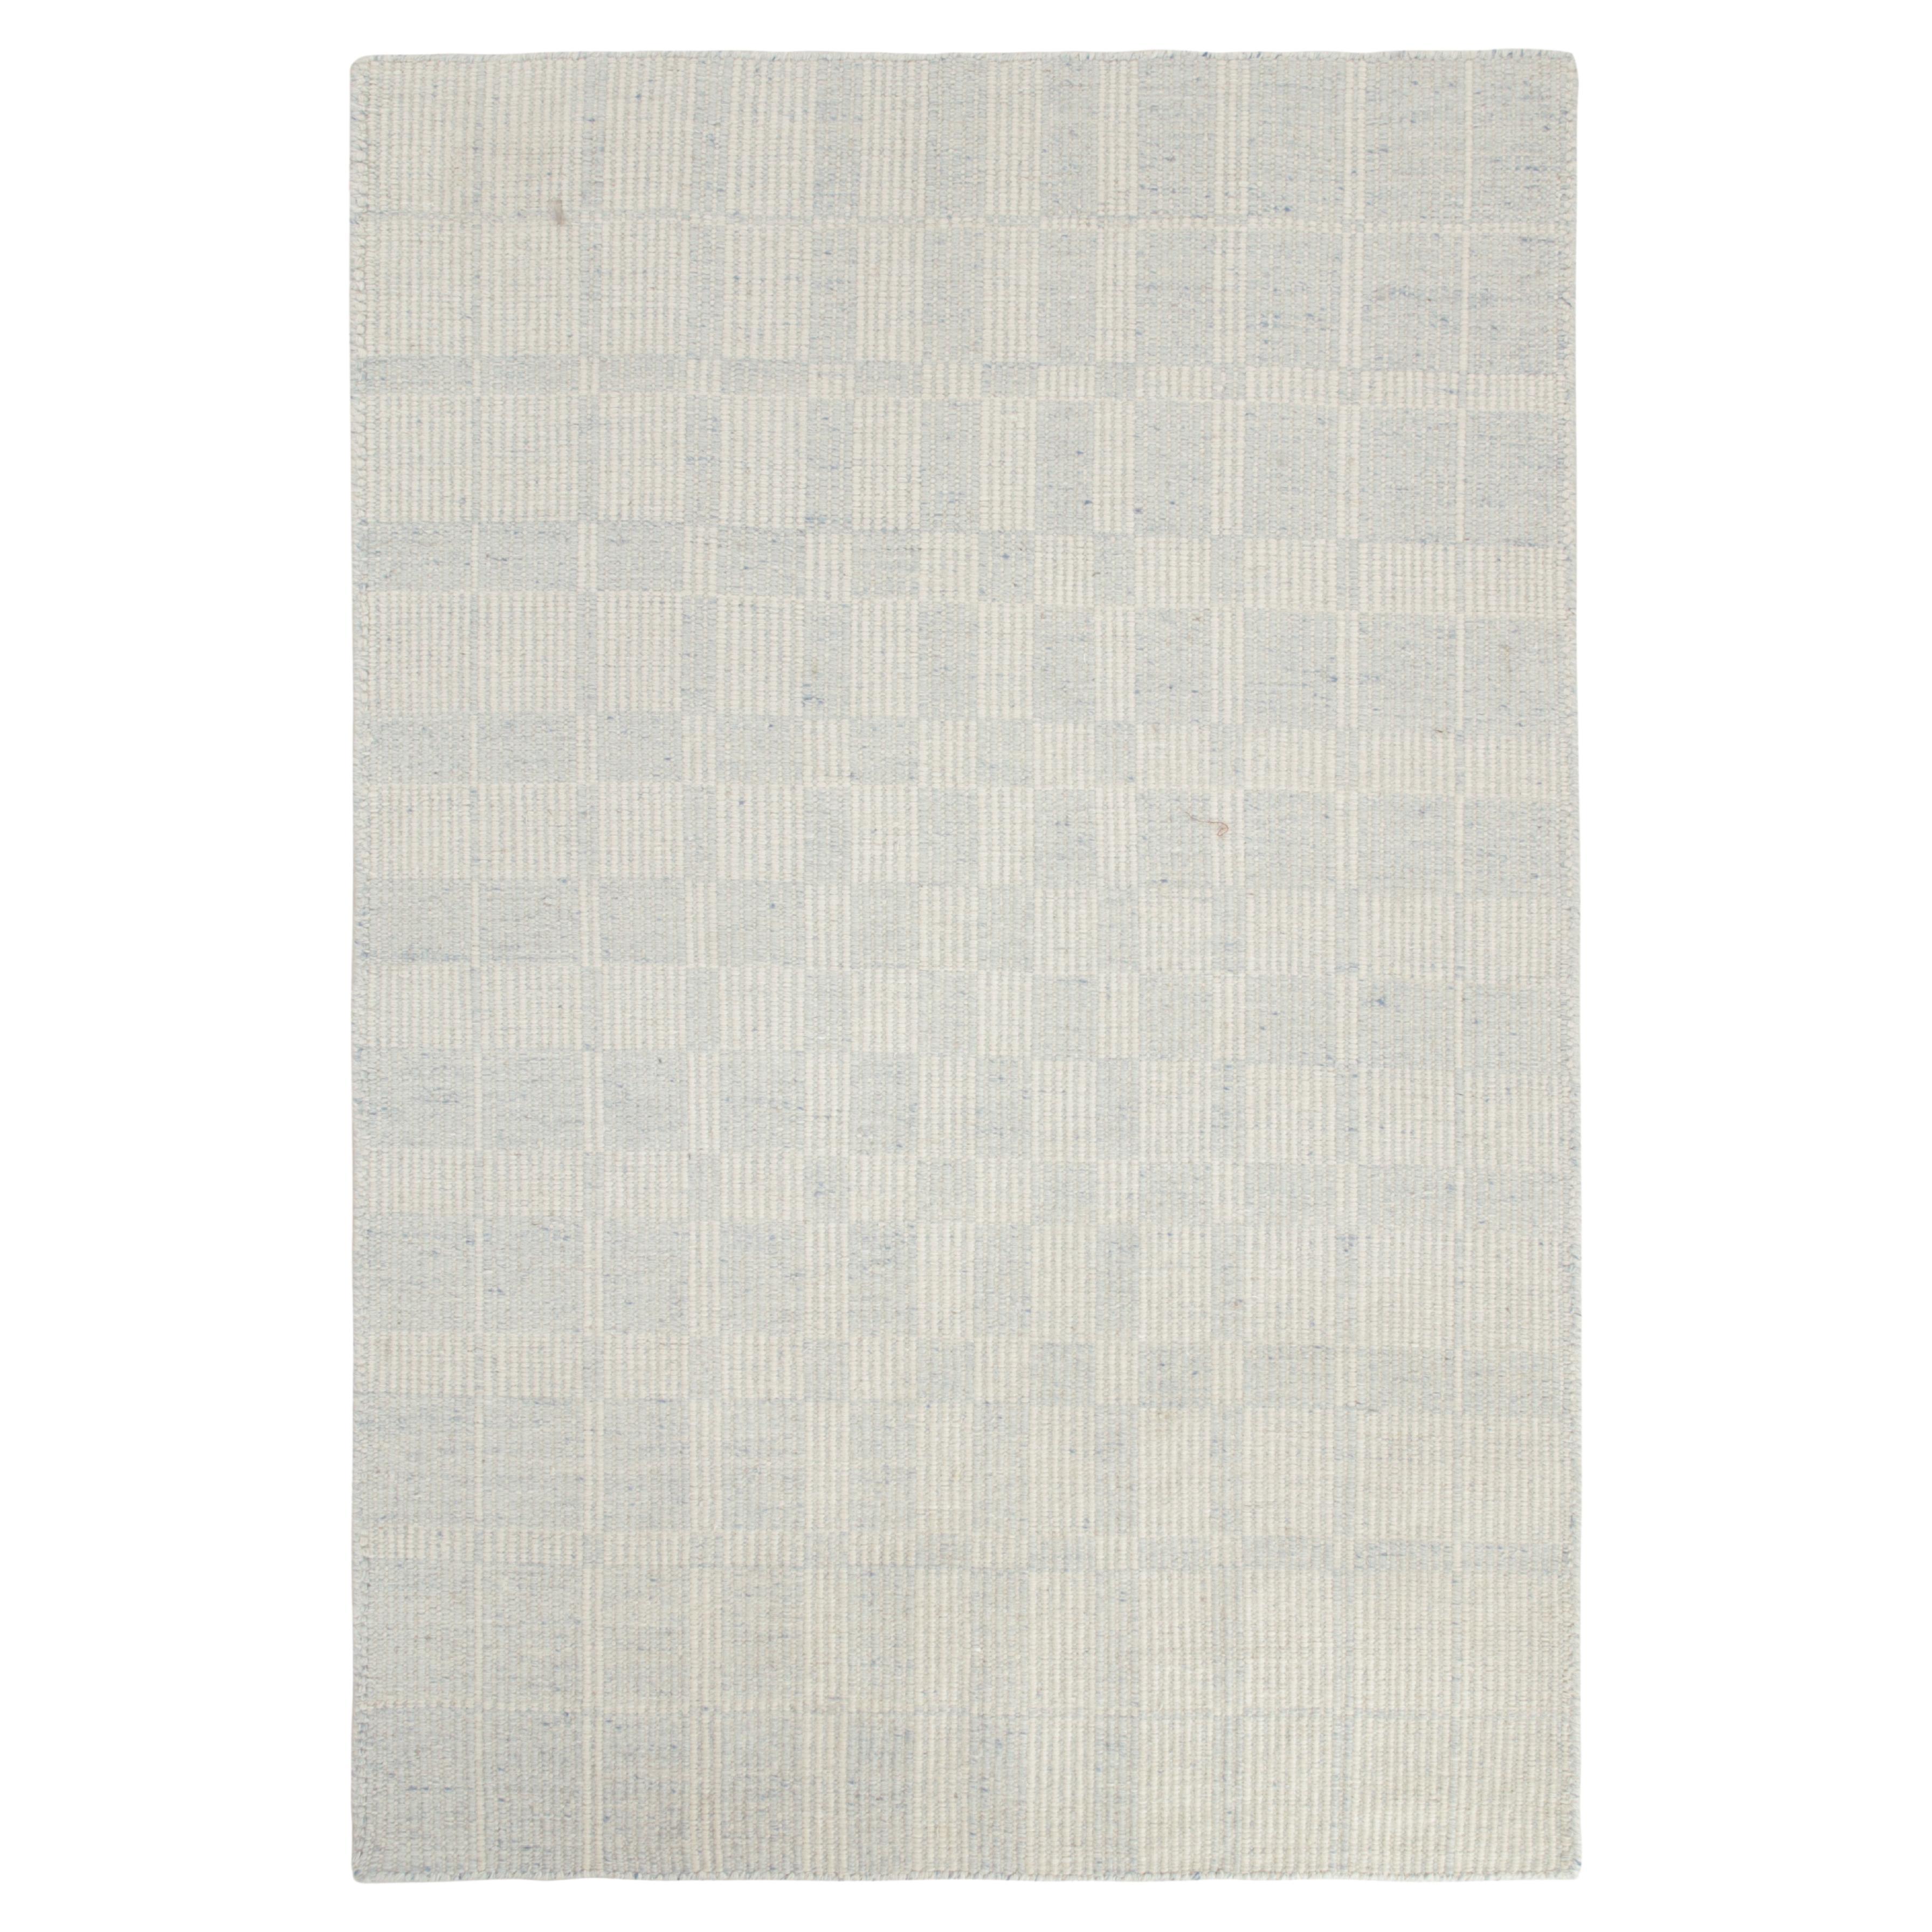 Rug & Kilim’s Scandinavian Style Kilim with Silver and Blue Geometric Patterns